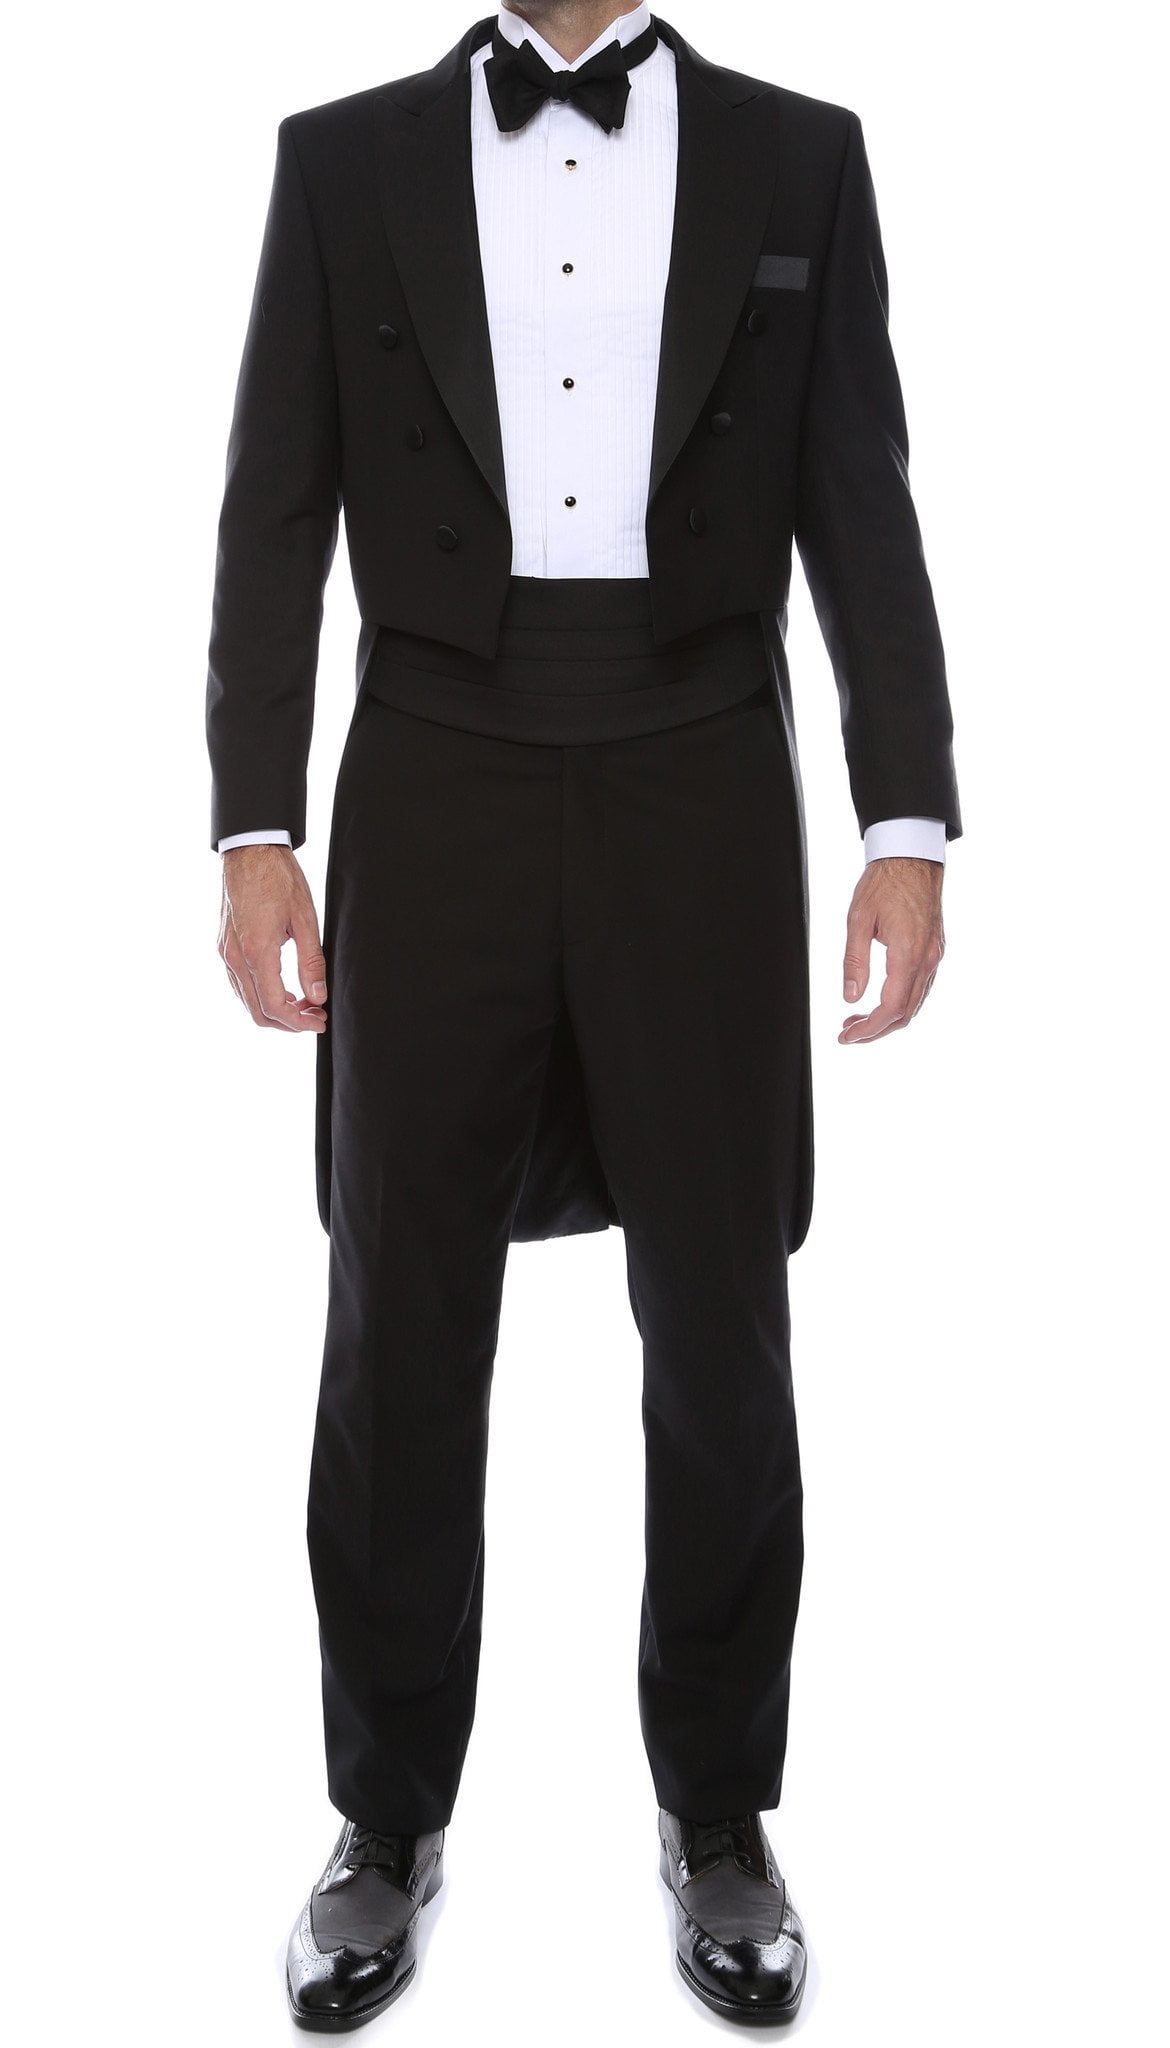 Broadway Tuxmakers Men's Black Tuxedo Jacket with Tails Tailcoat